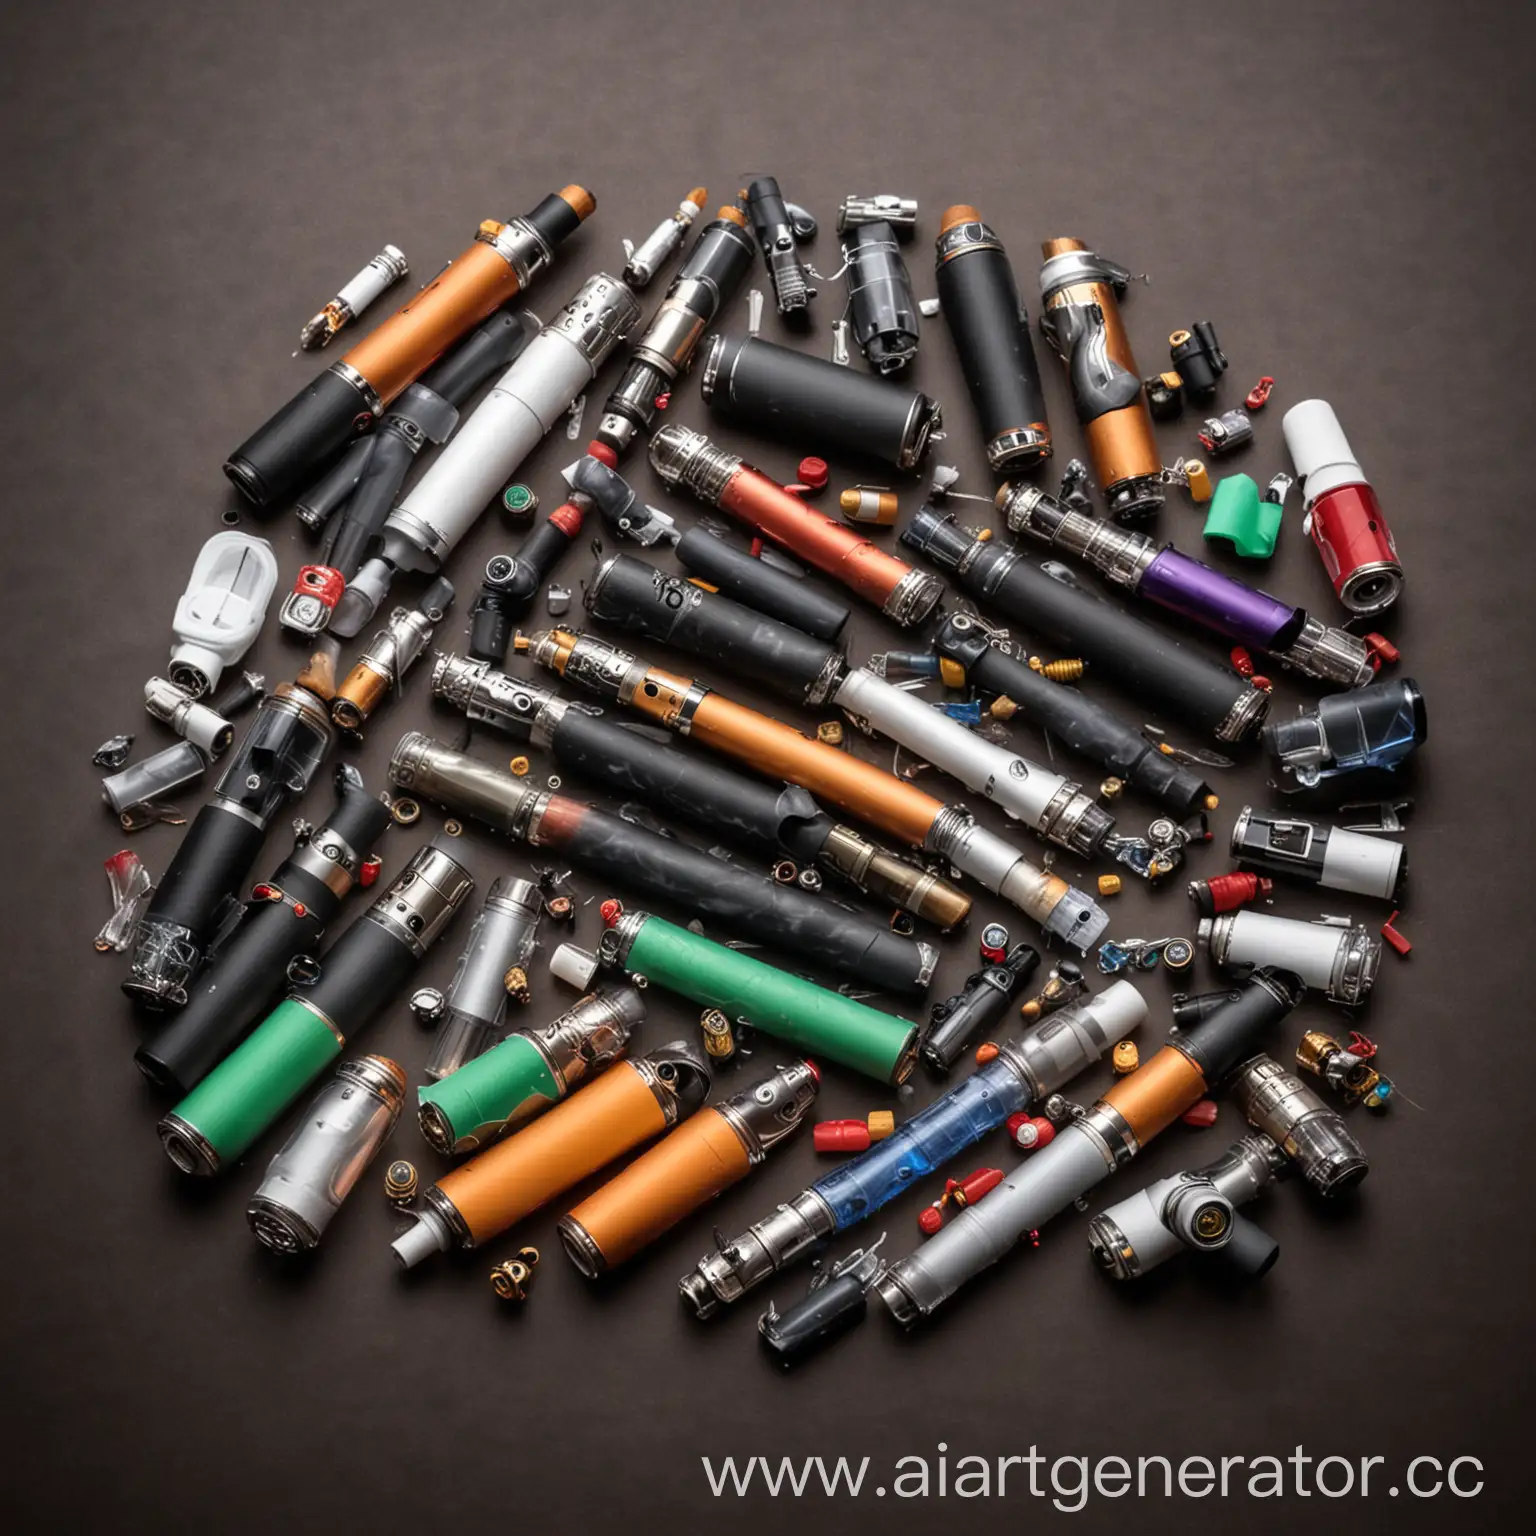 Heap-of-Electronic-Cigarettes-and-Pod-Devices-on-Table